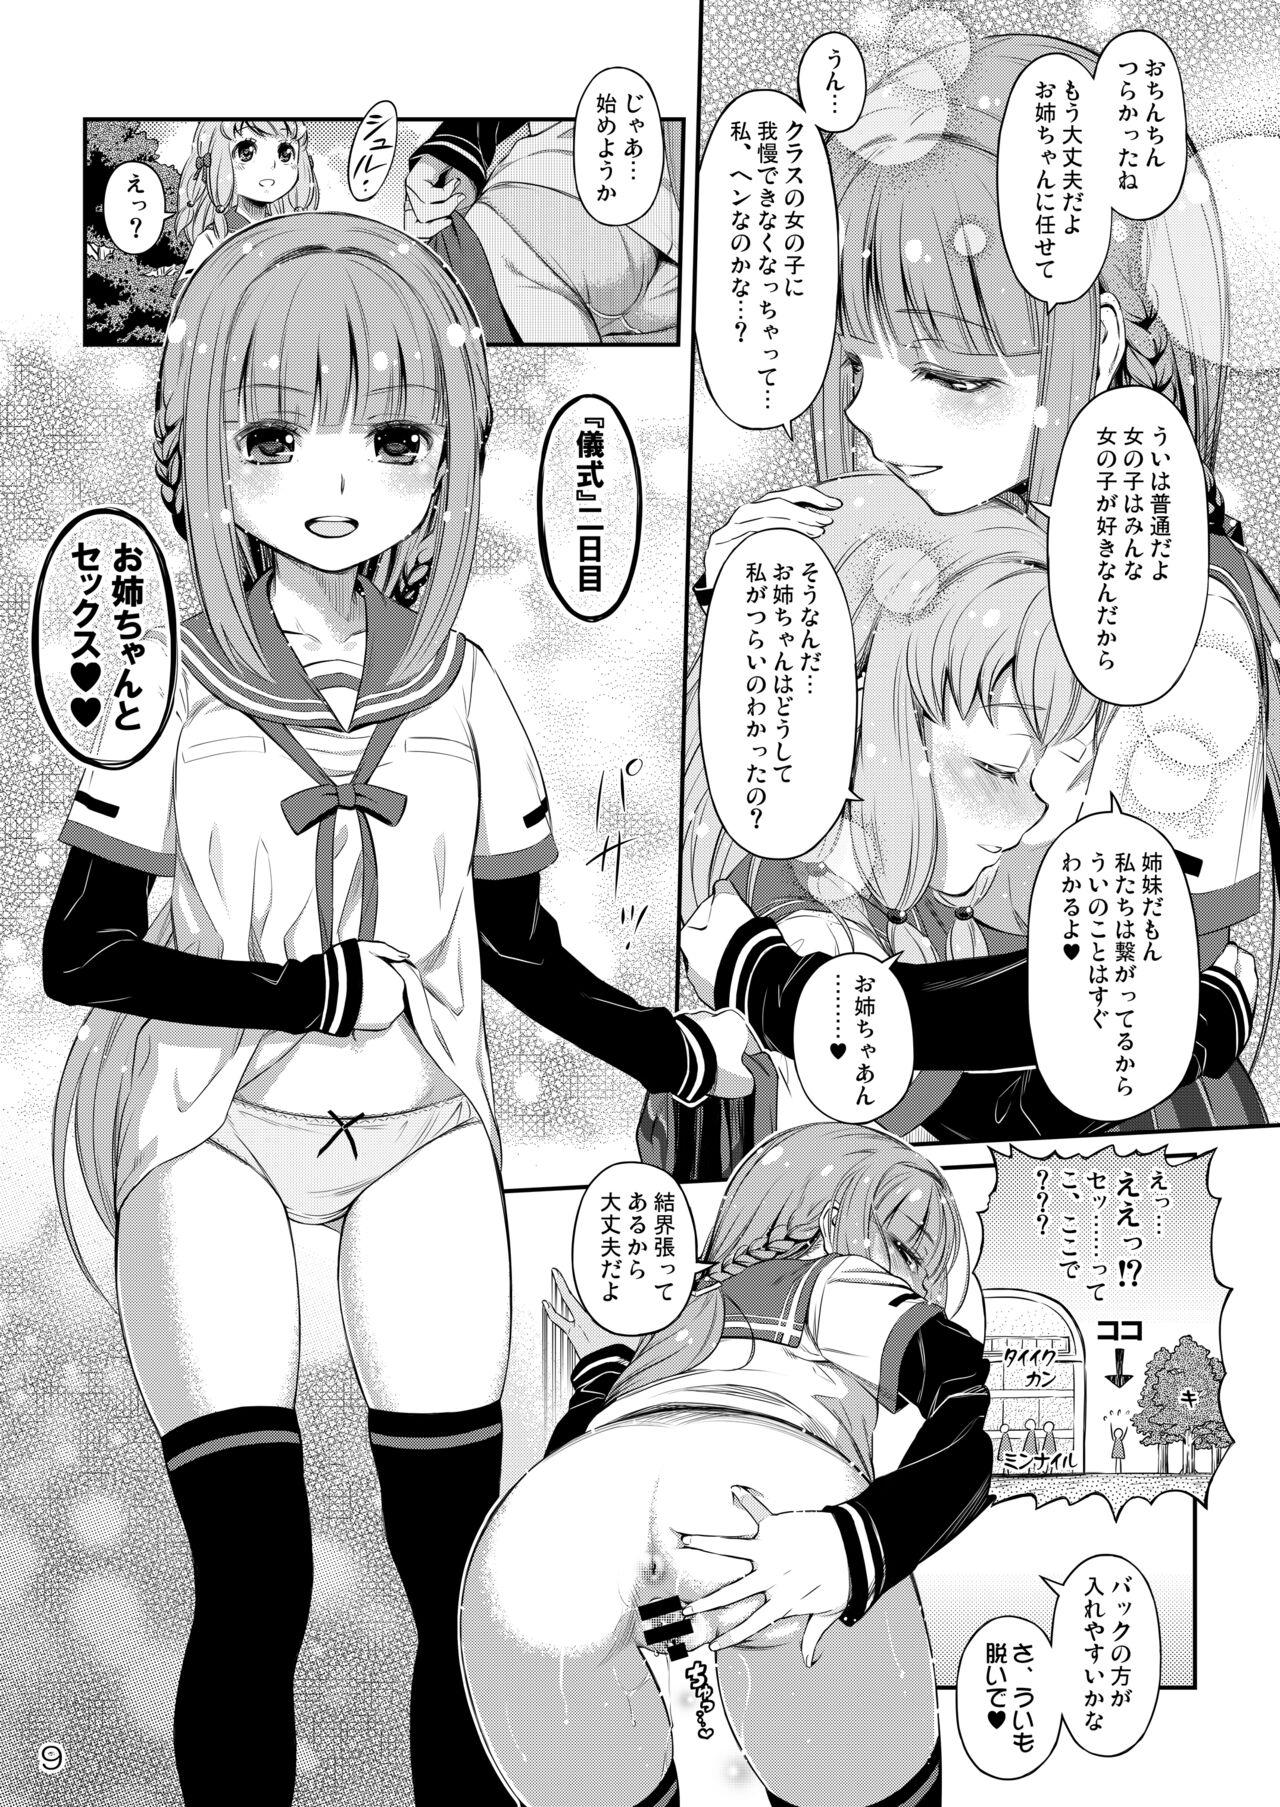 Twink Dear My Little Sister - Puella magi madoka magica side story magia record Husband - Page 8